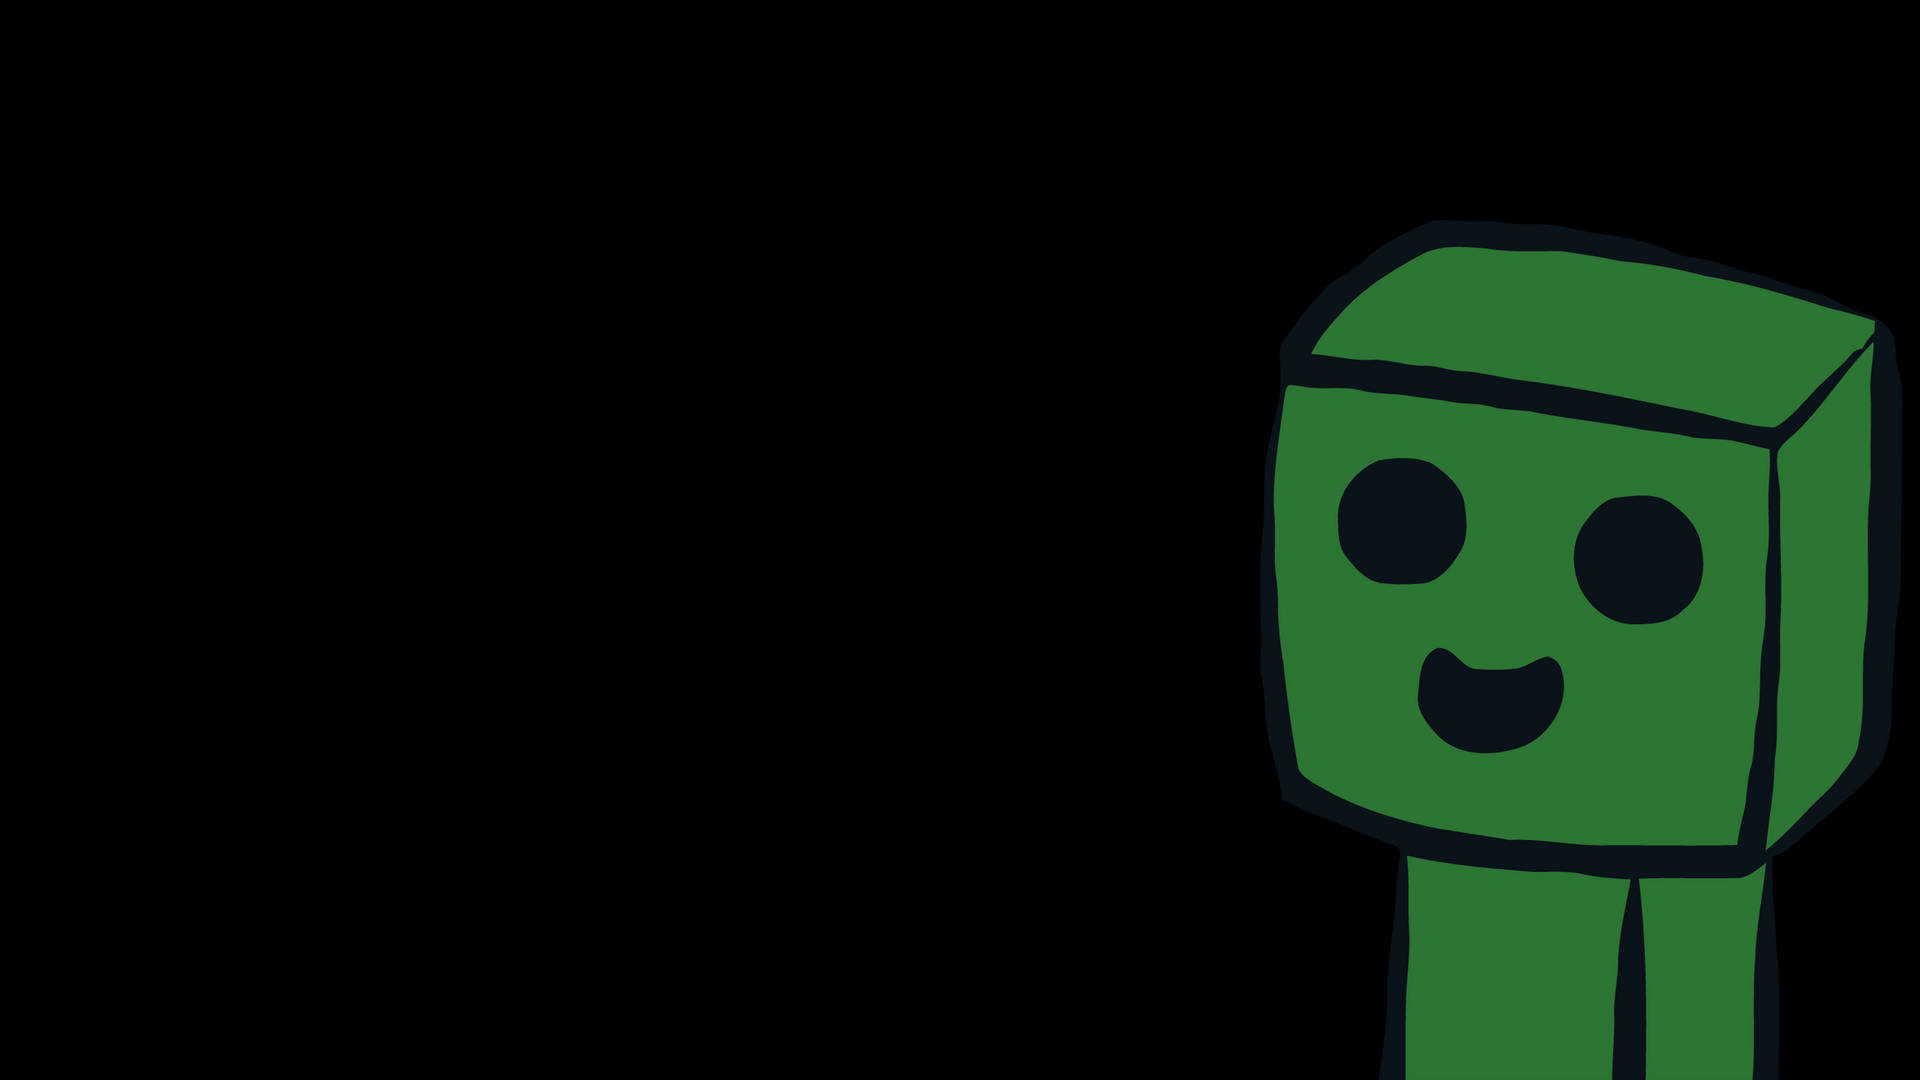 1920X1080 Minecraft Creeper Wallpaper and Background